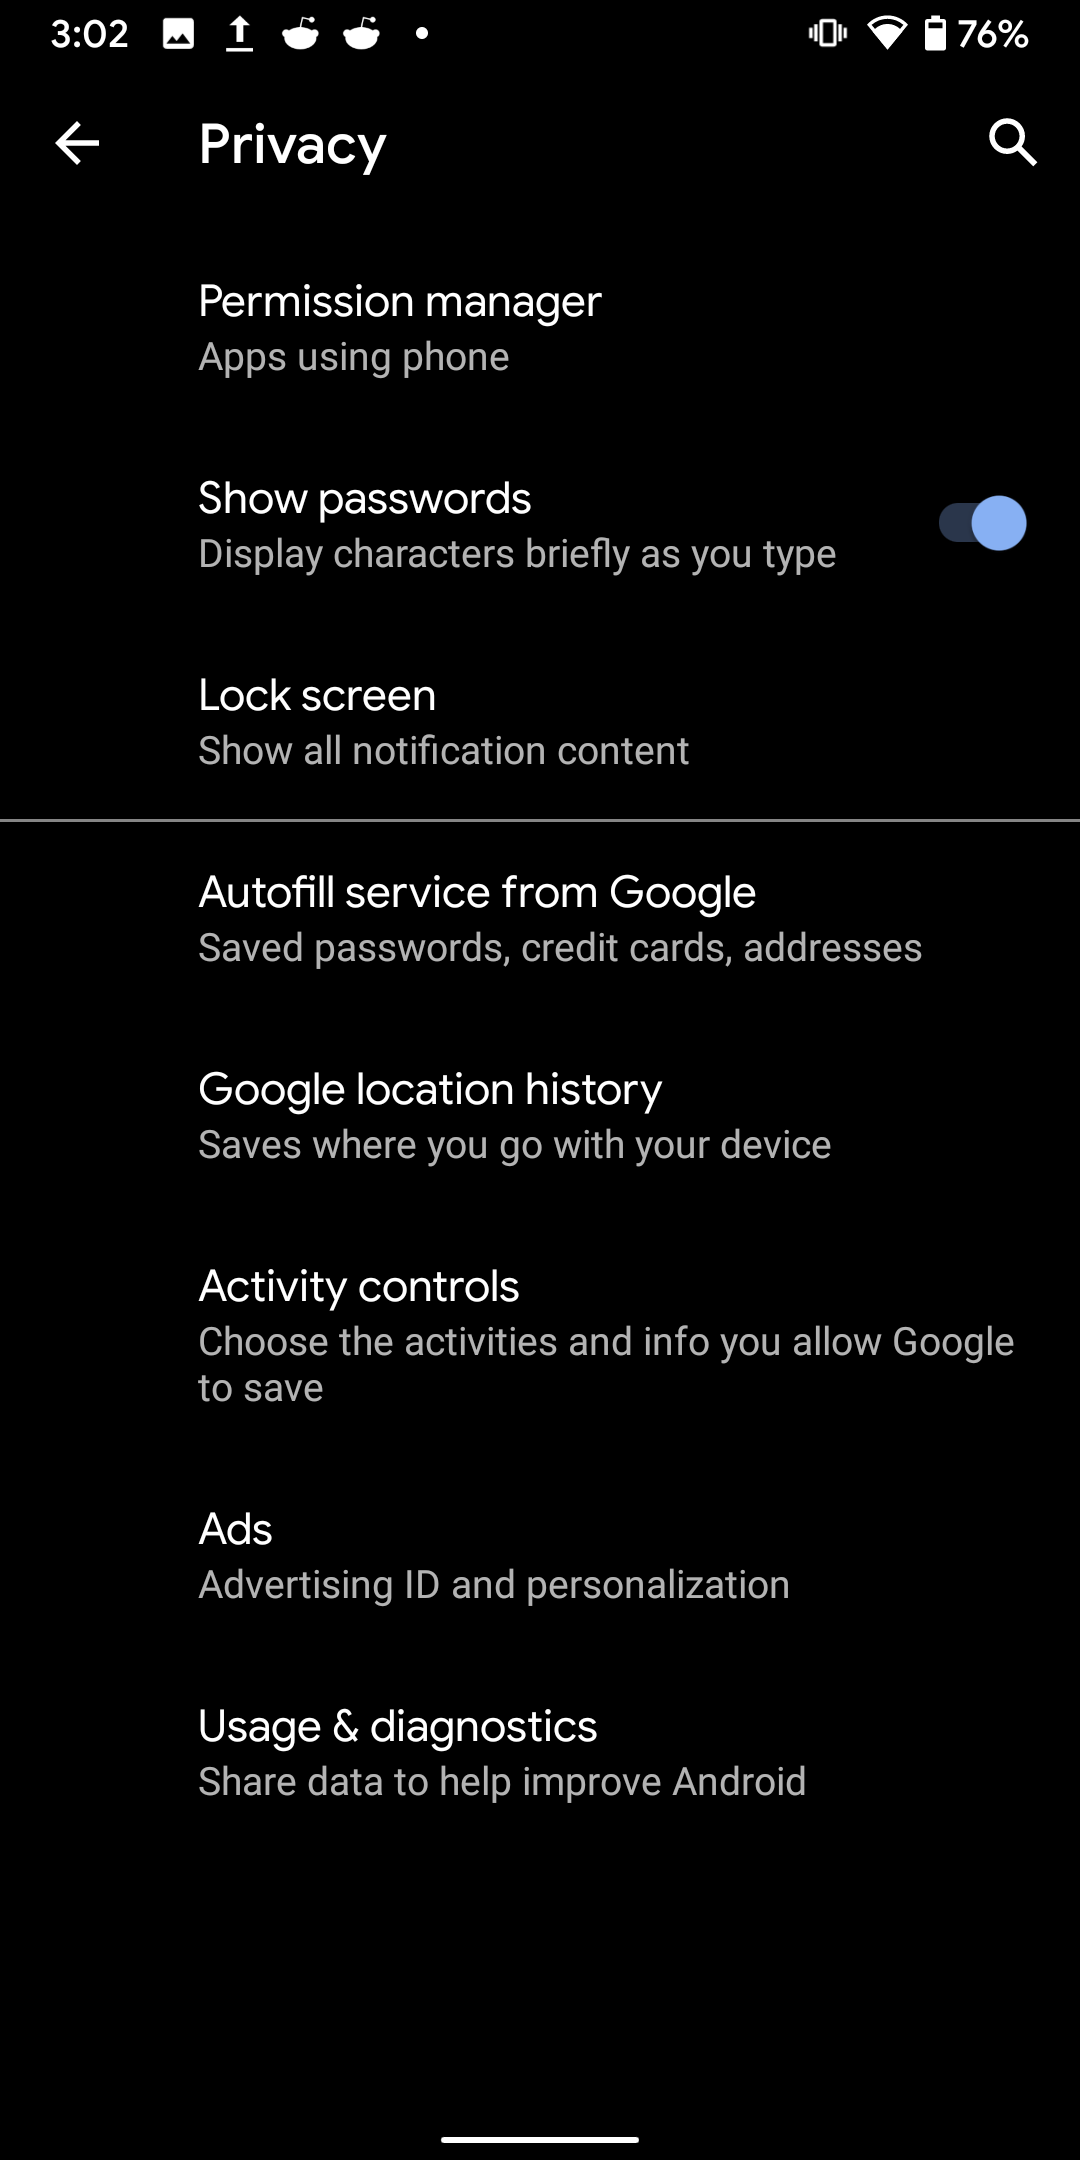 Android 10 Advanced Privacy Settings